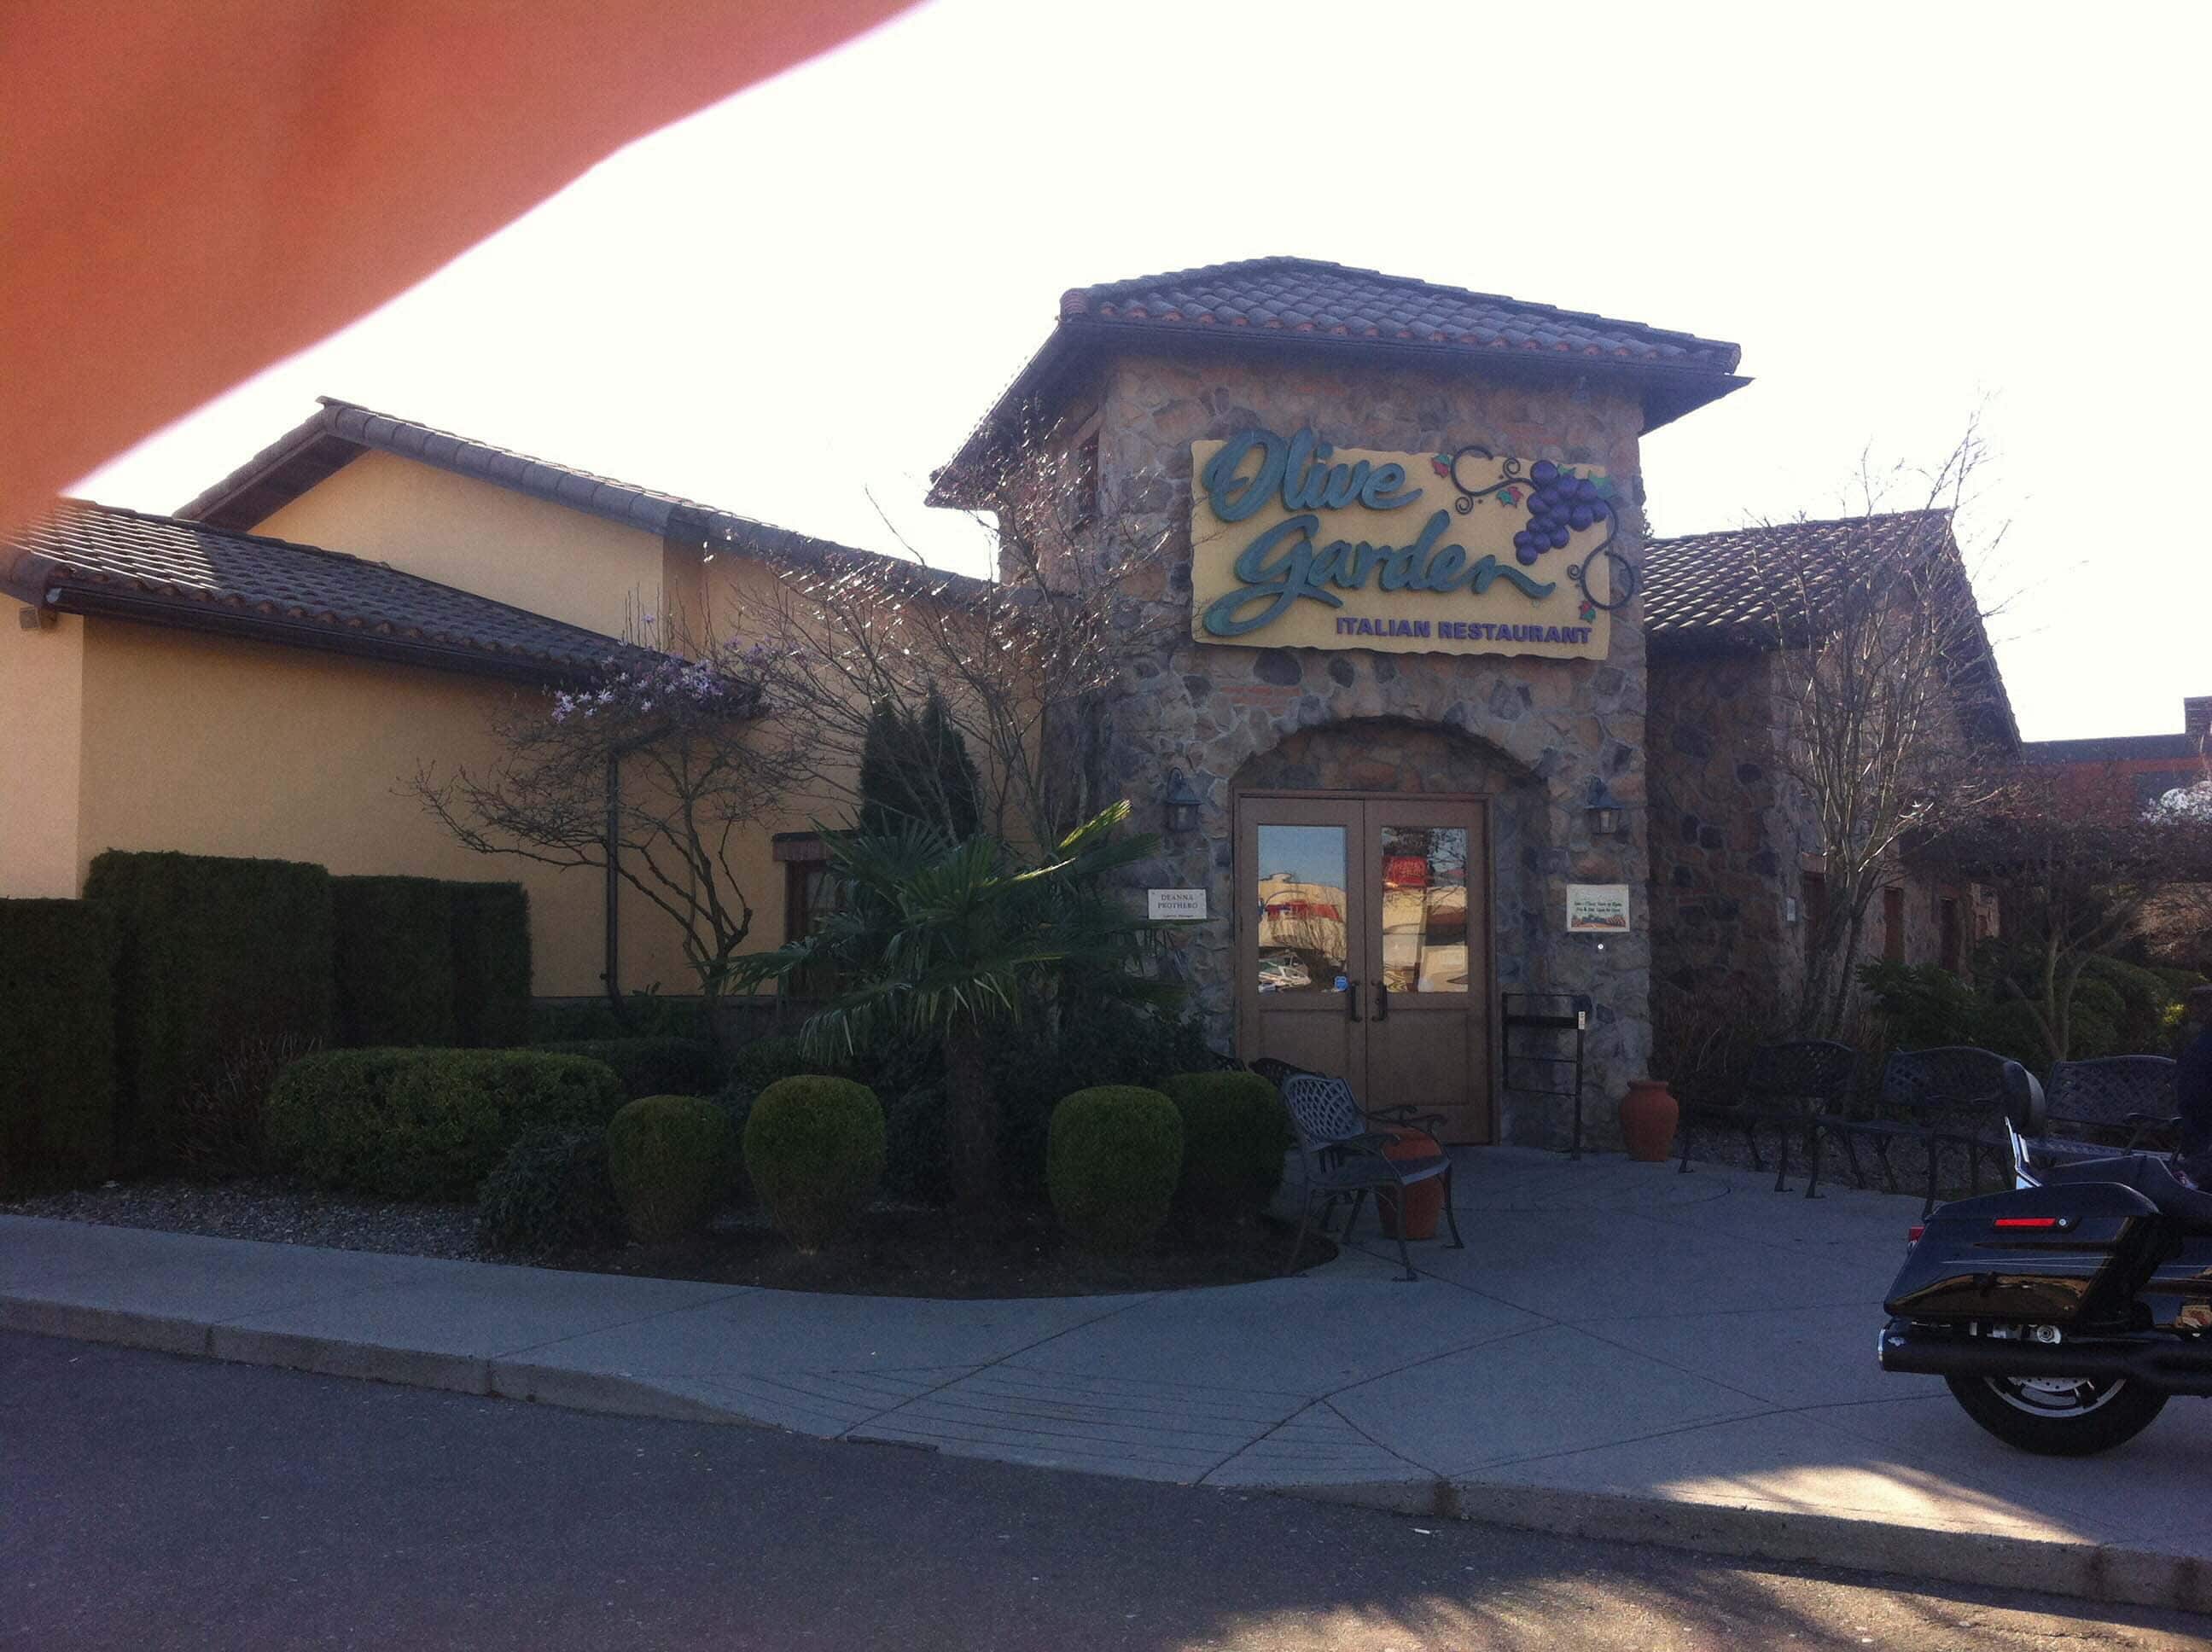 Olive Garden Photos Pictures Of Olive Garden City Of Langley Langley